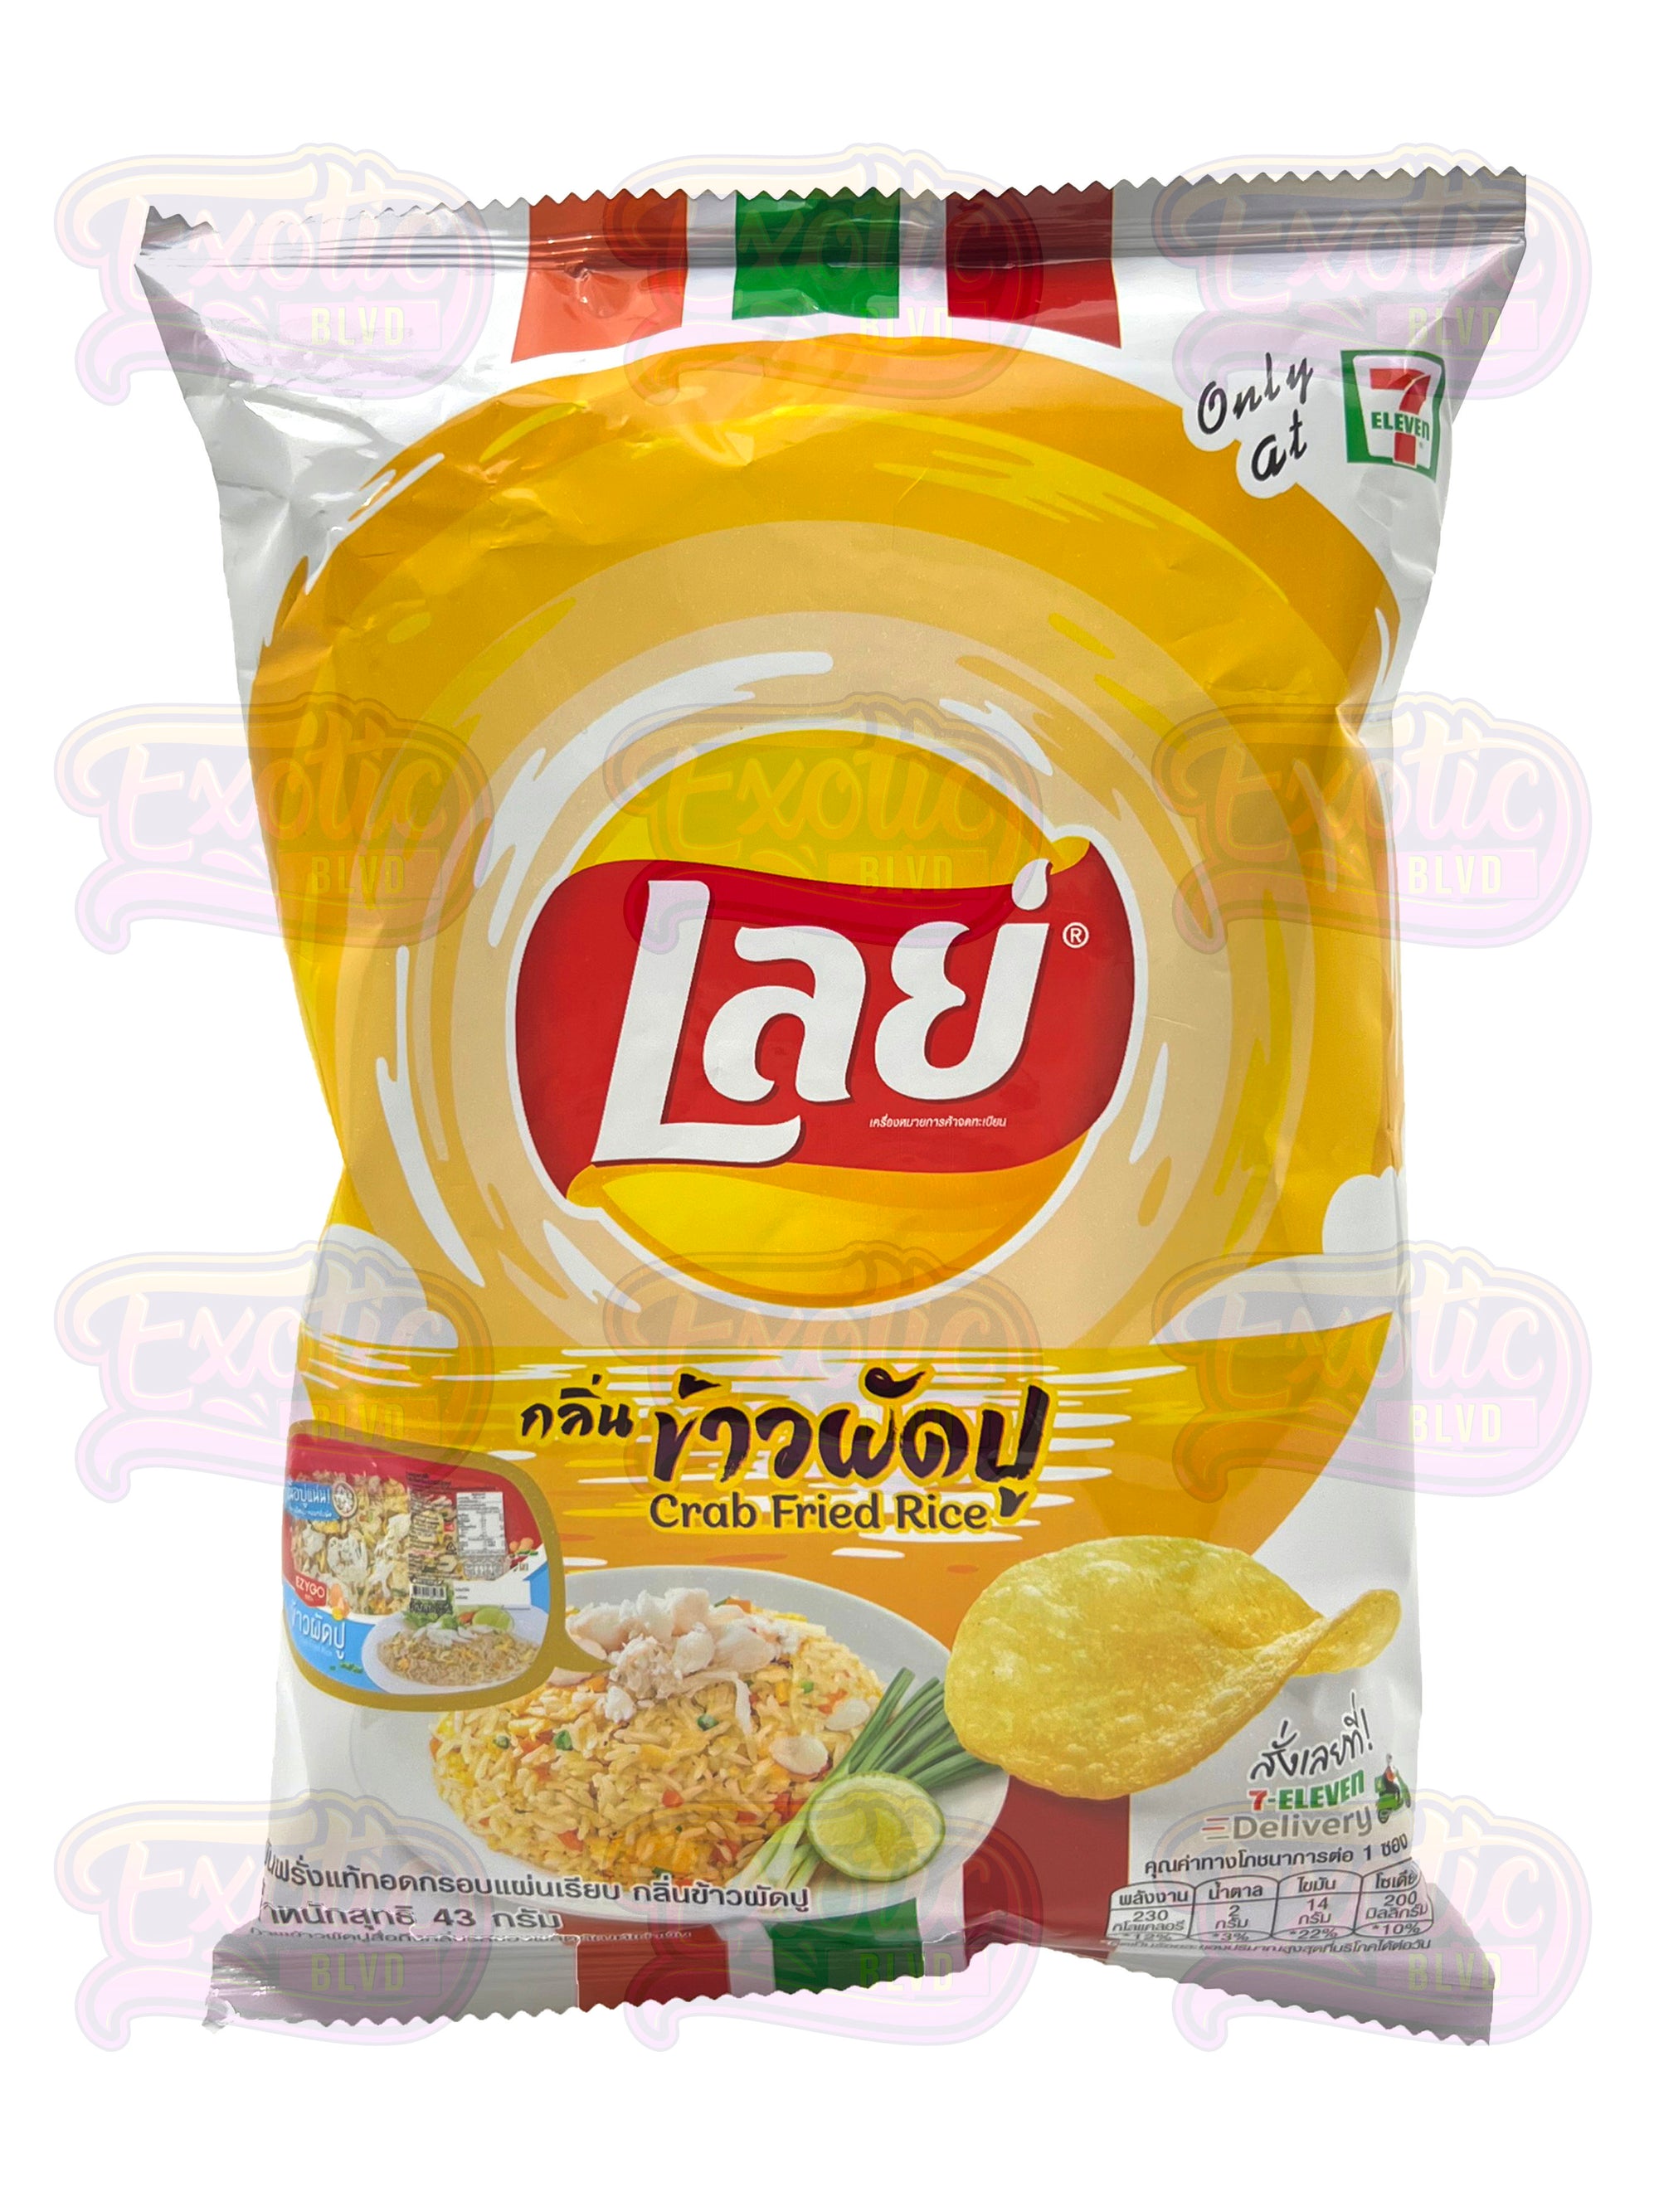 Lay's Crab Fried Rice